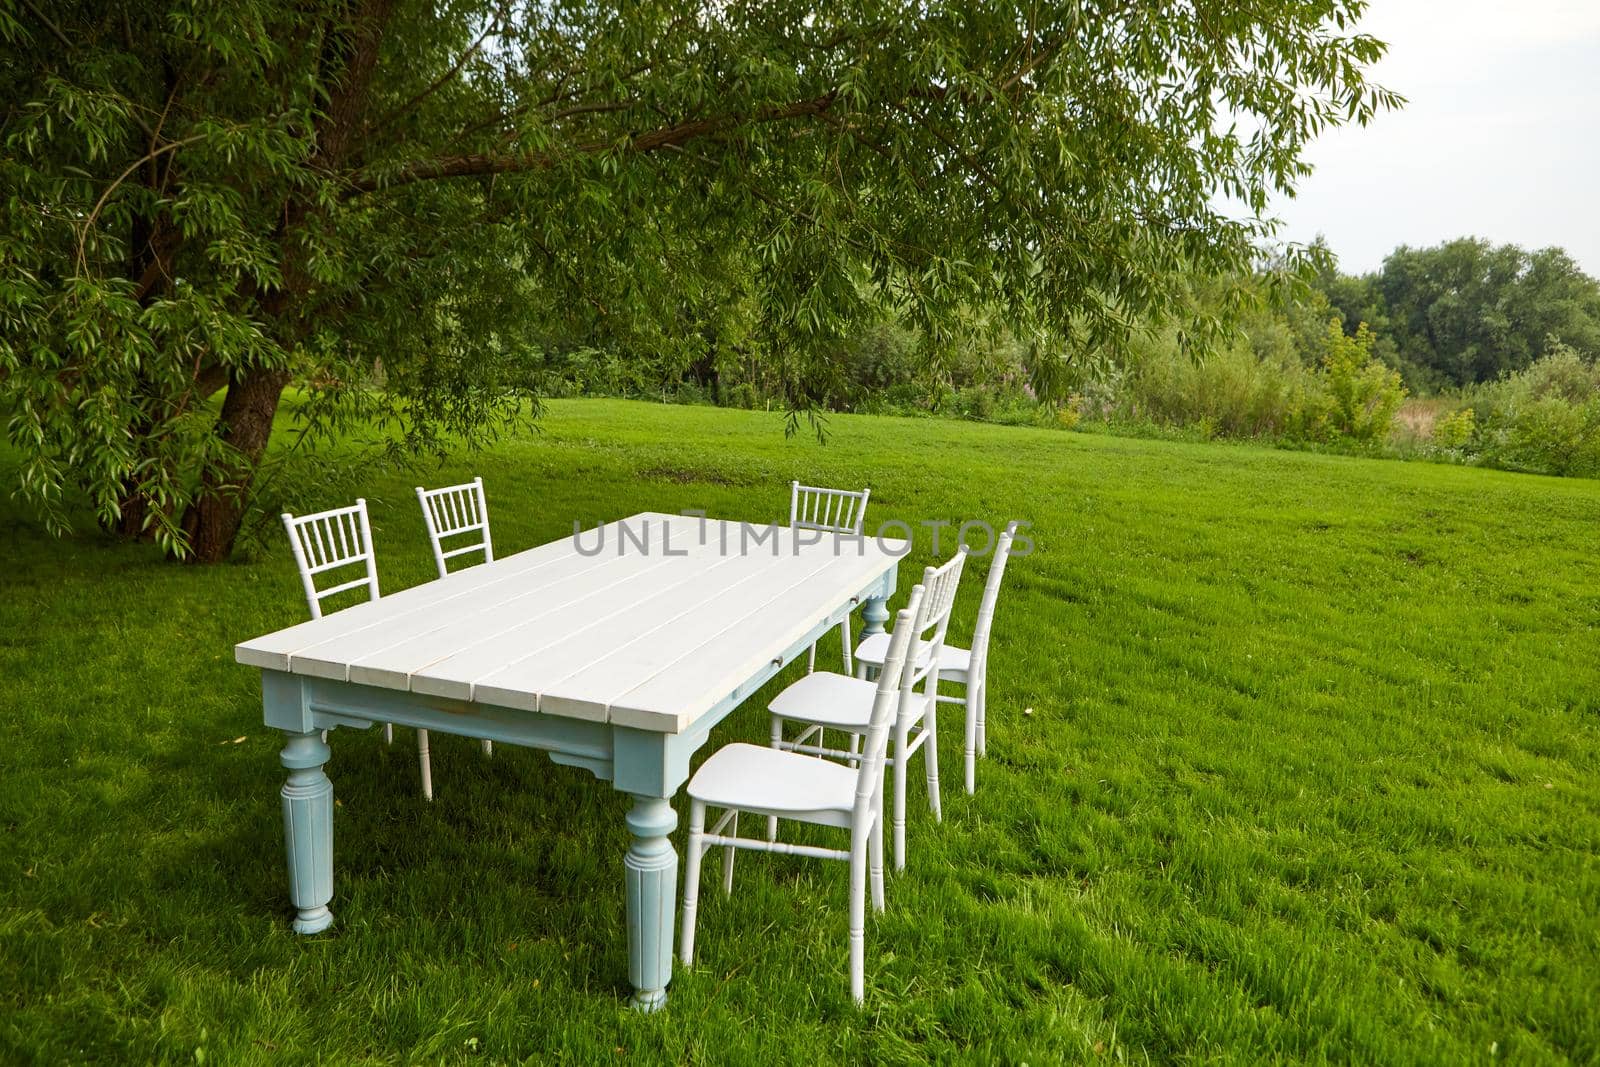 White table with chairs located on green grass under lush tree on summer day in field